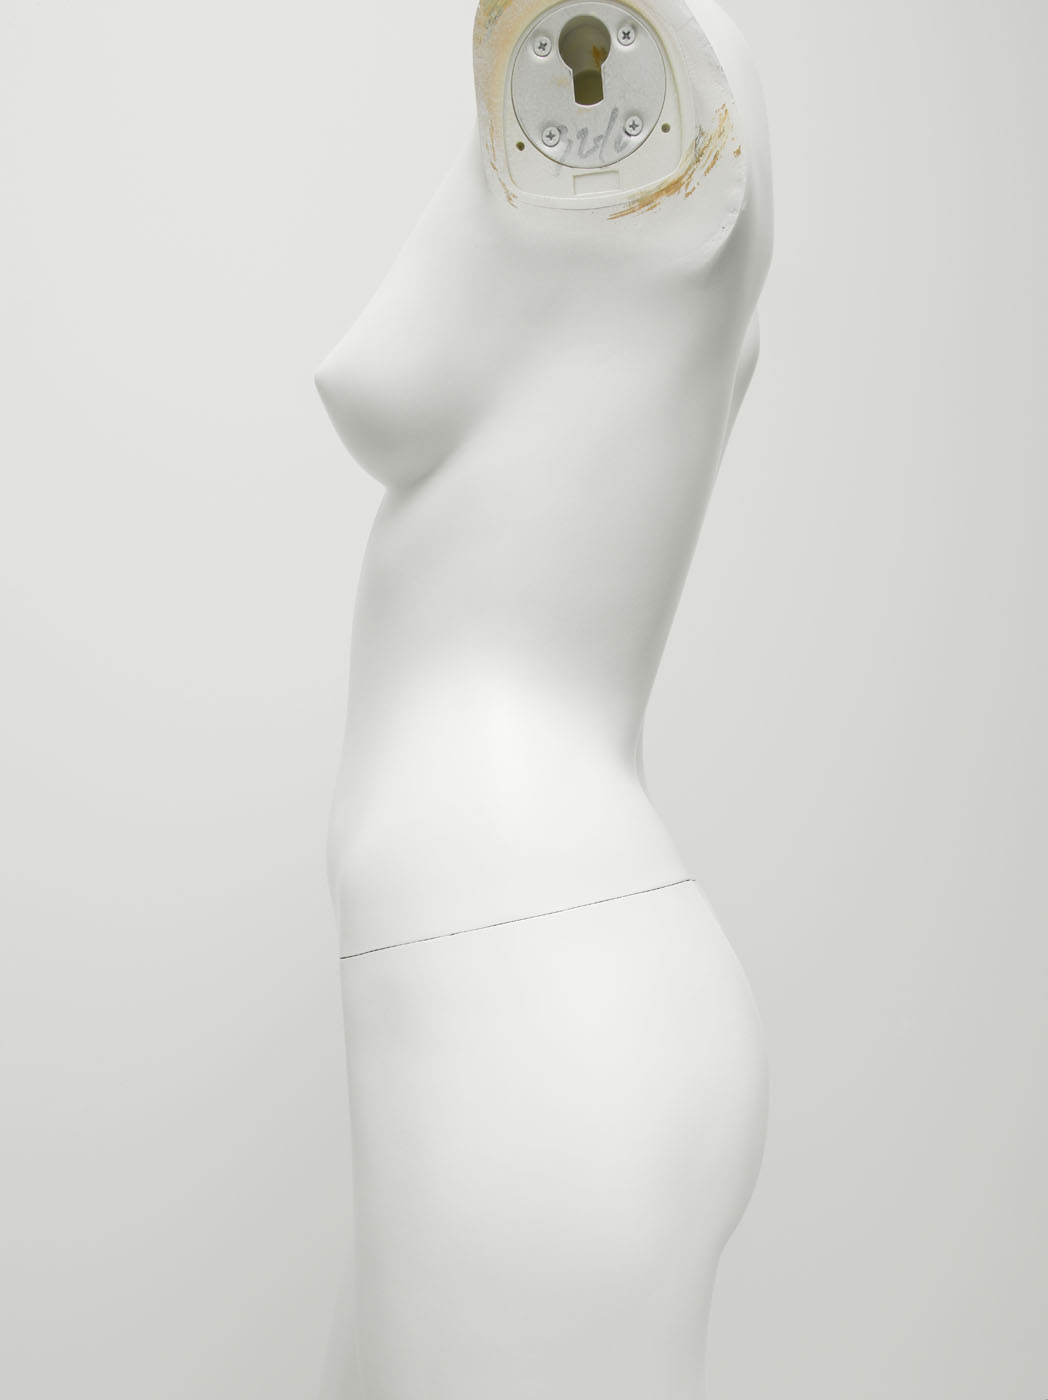 Mannequin photo by Alexander Kent London based still life and product photographer.